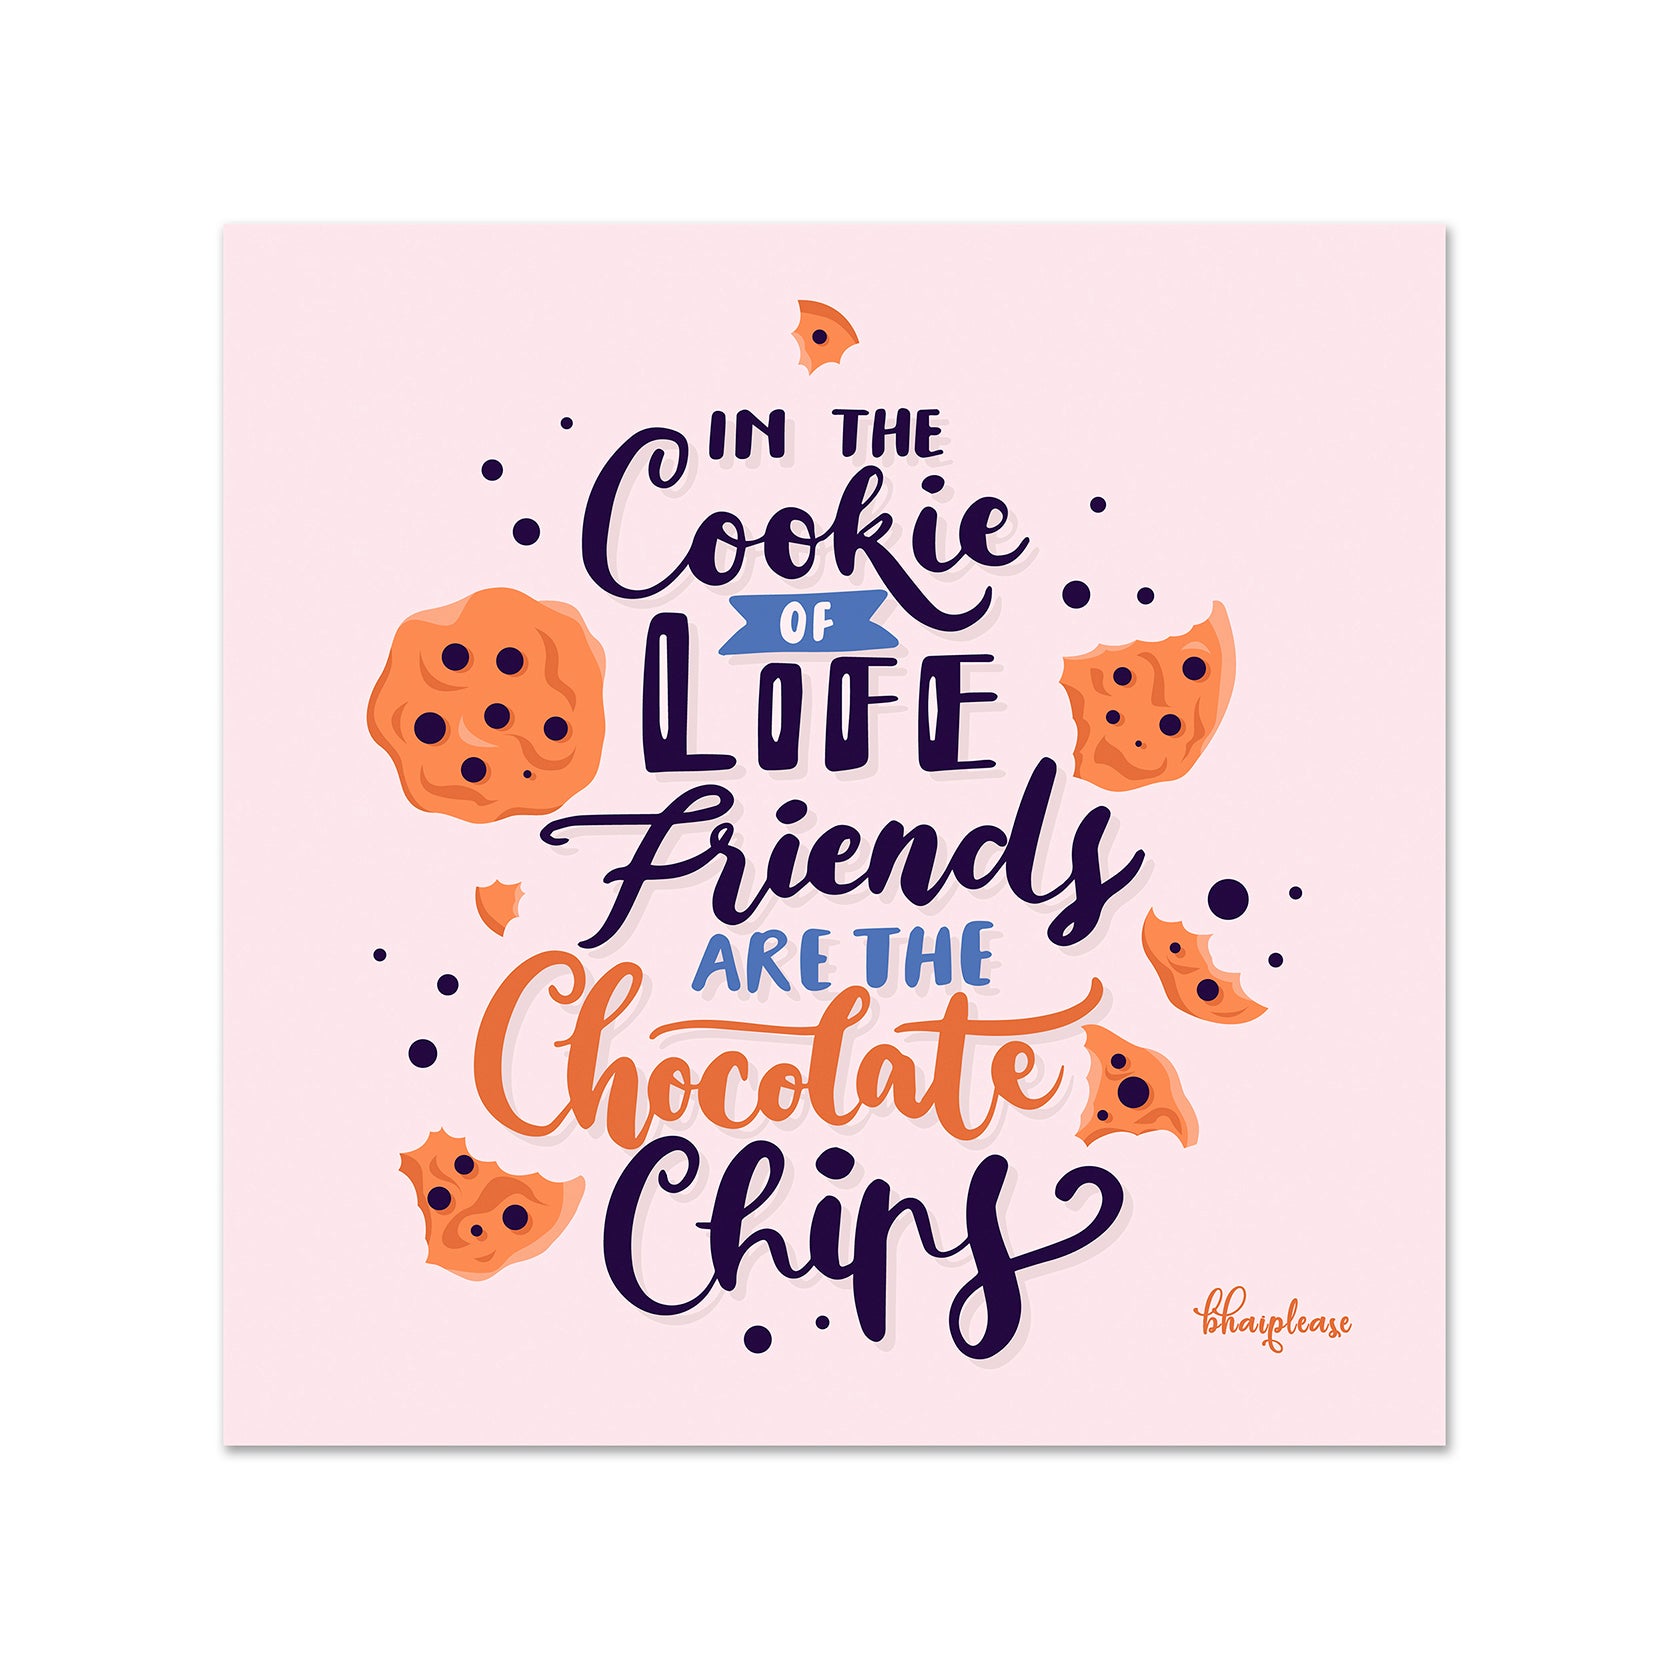 In The Cookie of Life Friends are The Chocolate Chips Wooden Fridge / Refrigerator Magnet